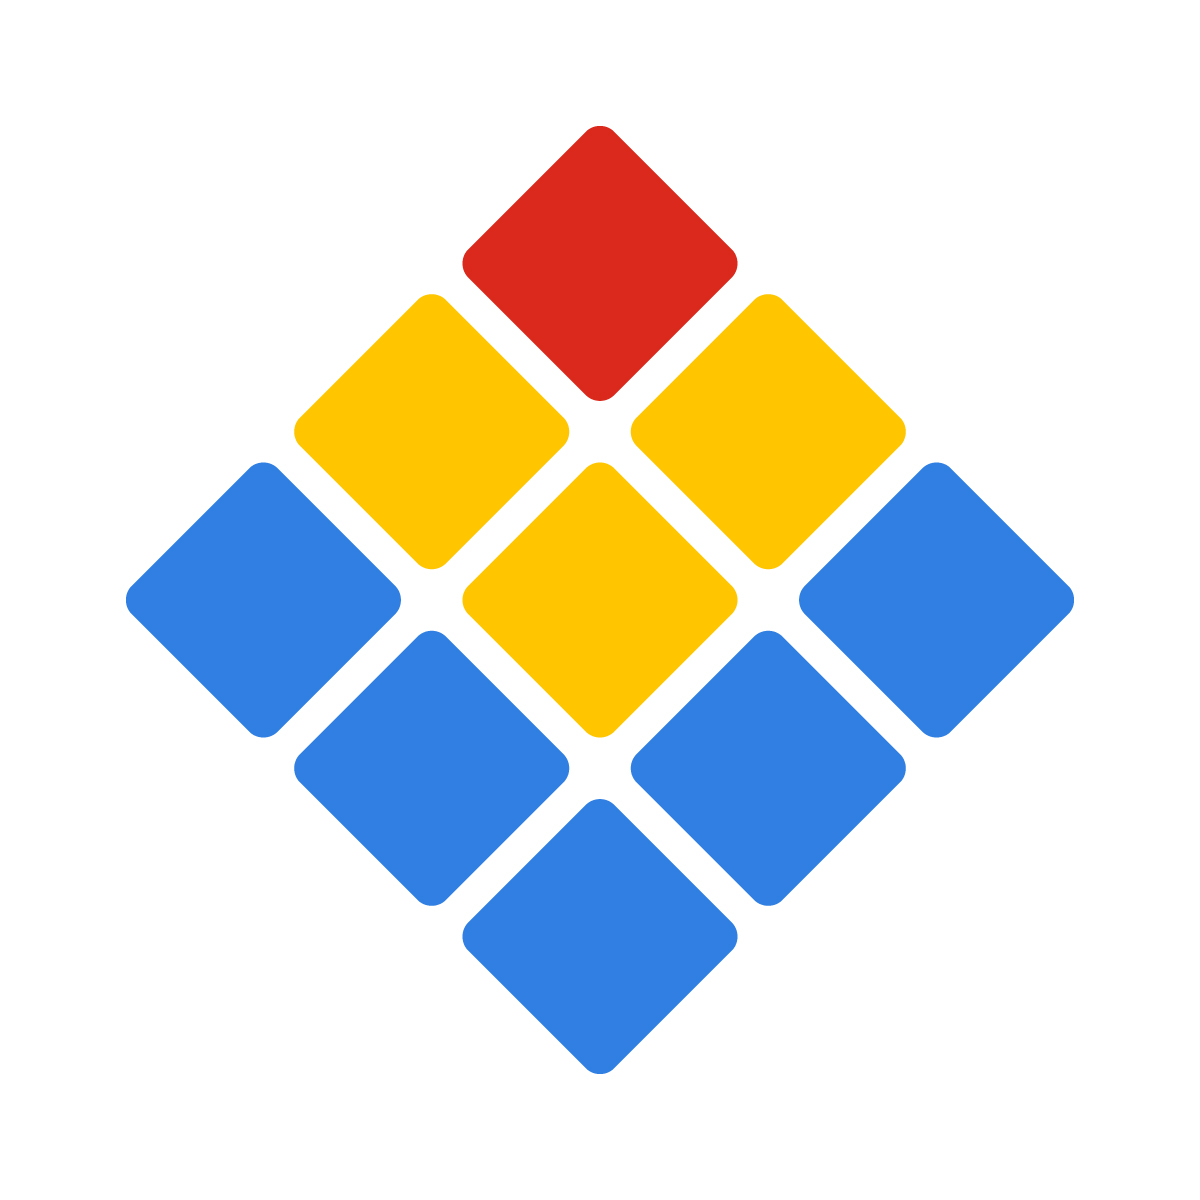 http://Lattice%20Training%20logo.%20Colours,%20red,%20yellow%20and%20blue.%20Shaped%20into%20a%20lattice.